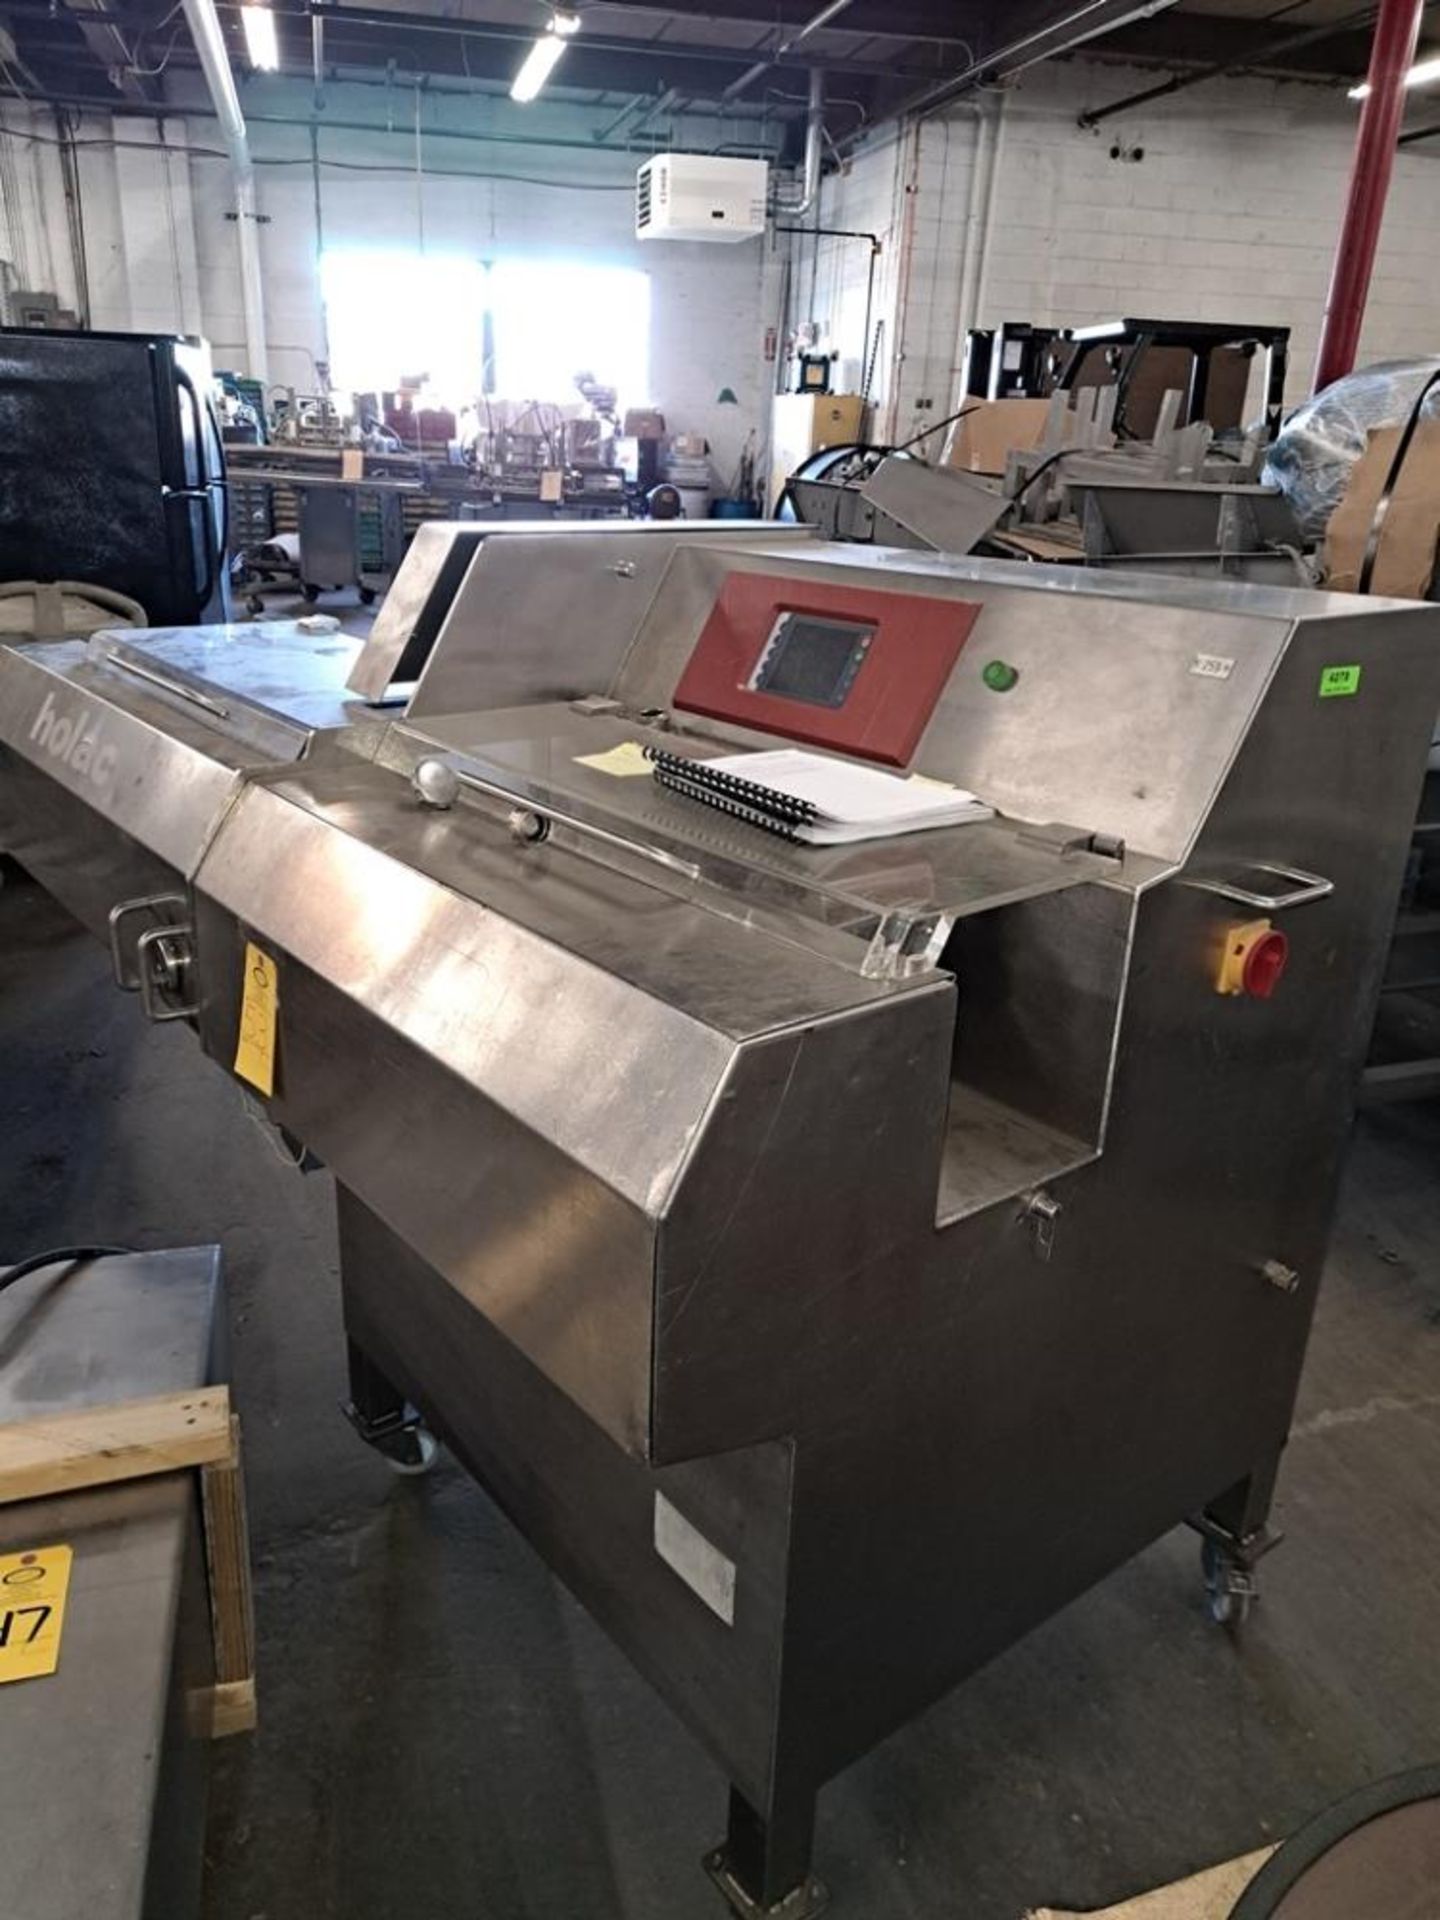 Holac Mdl. 23/74 Sectronic Portion Cutting Machine (Located in Sandwich, IL)